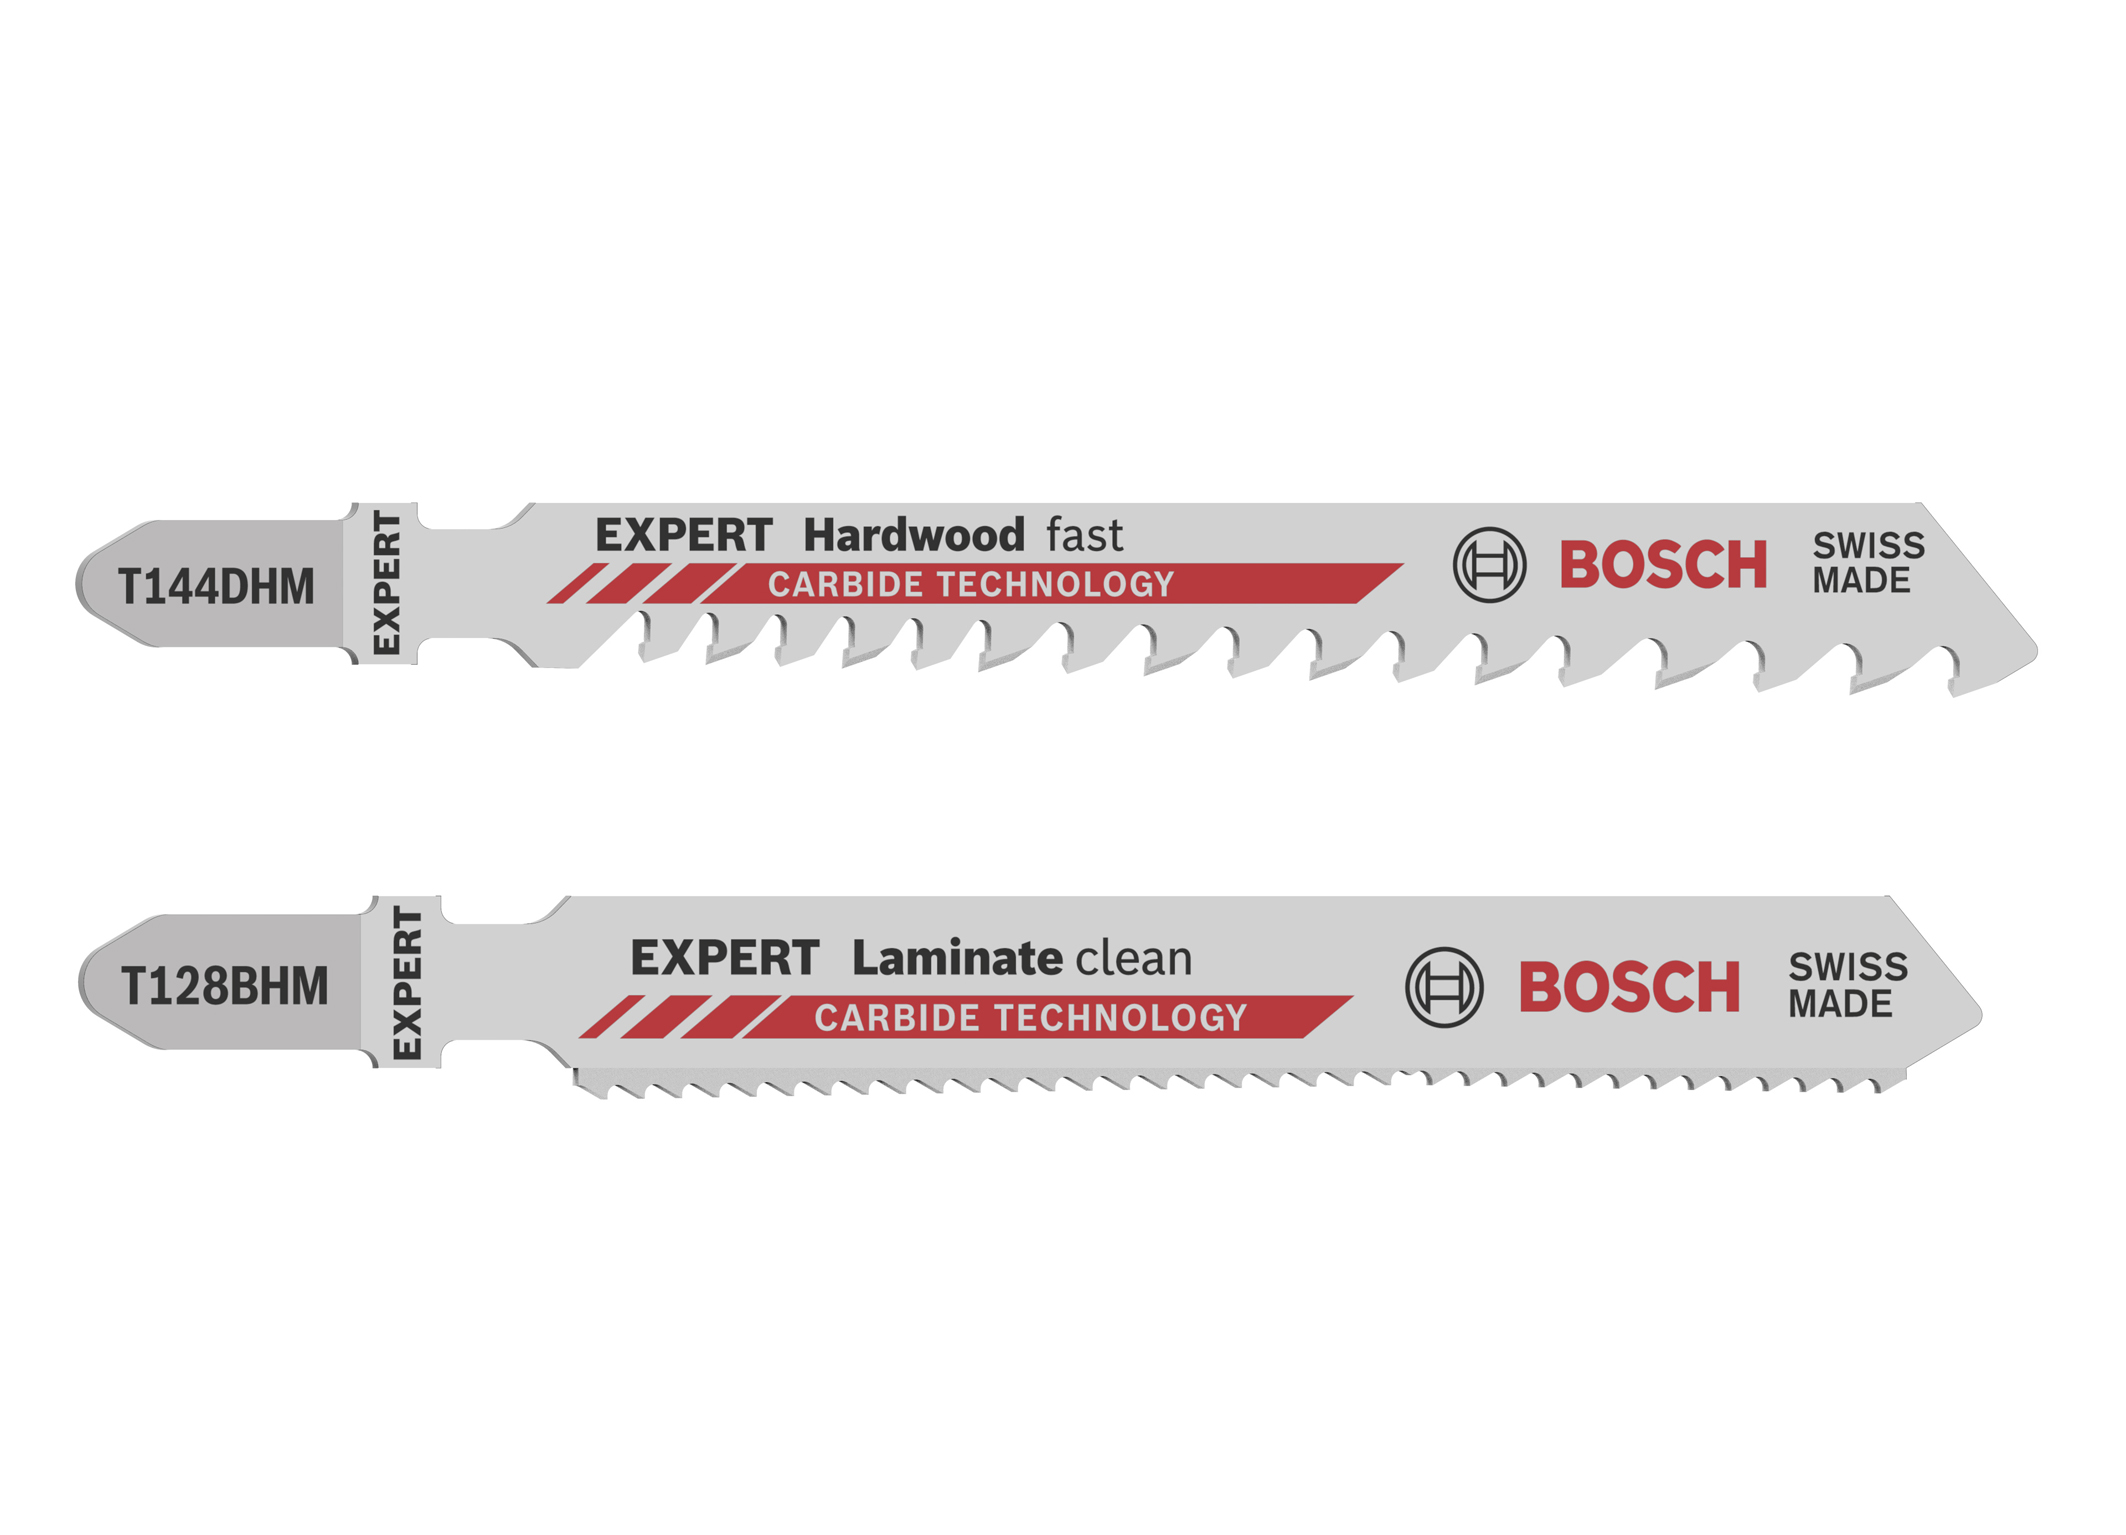 Extremely durable and robust for the toughest applications: New Bosch jigsaw blades with carbide technology